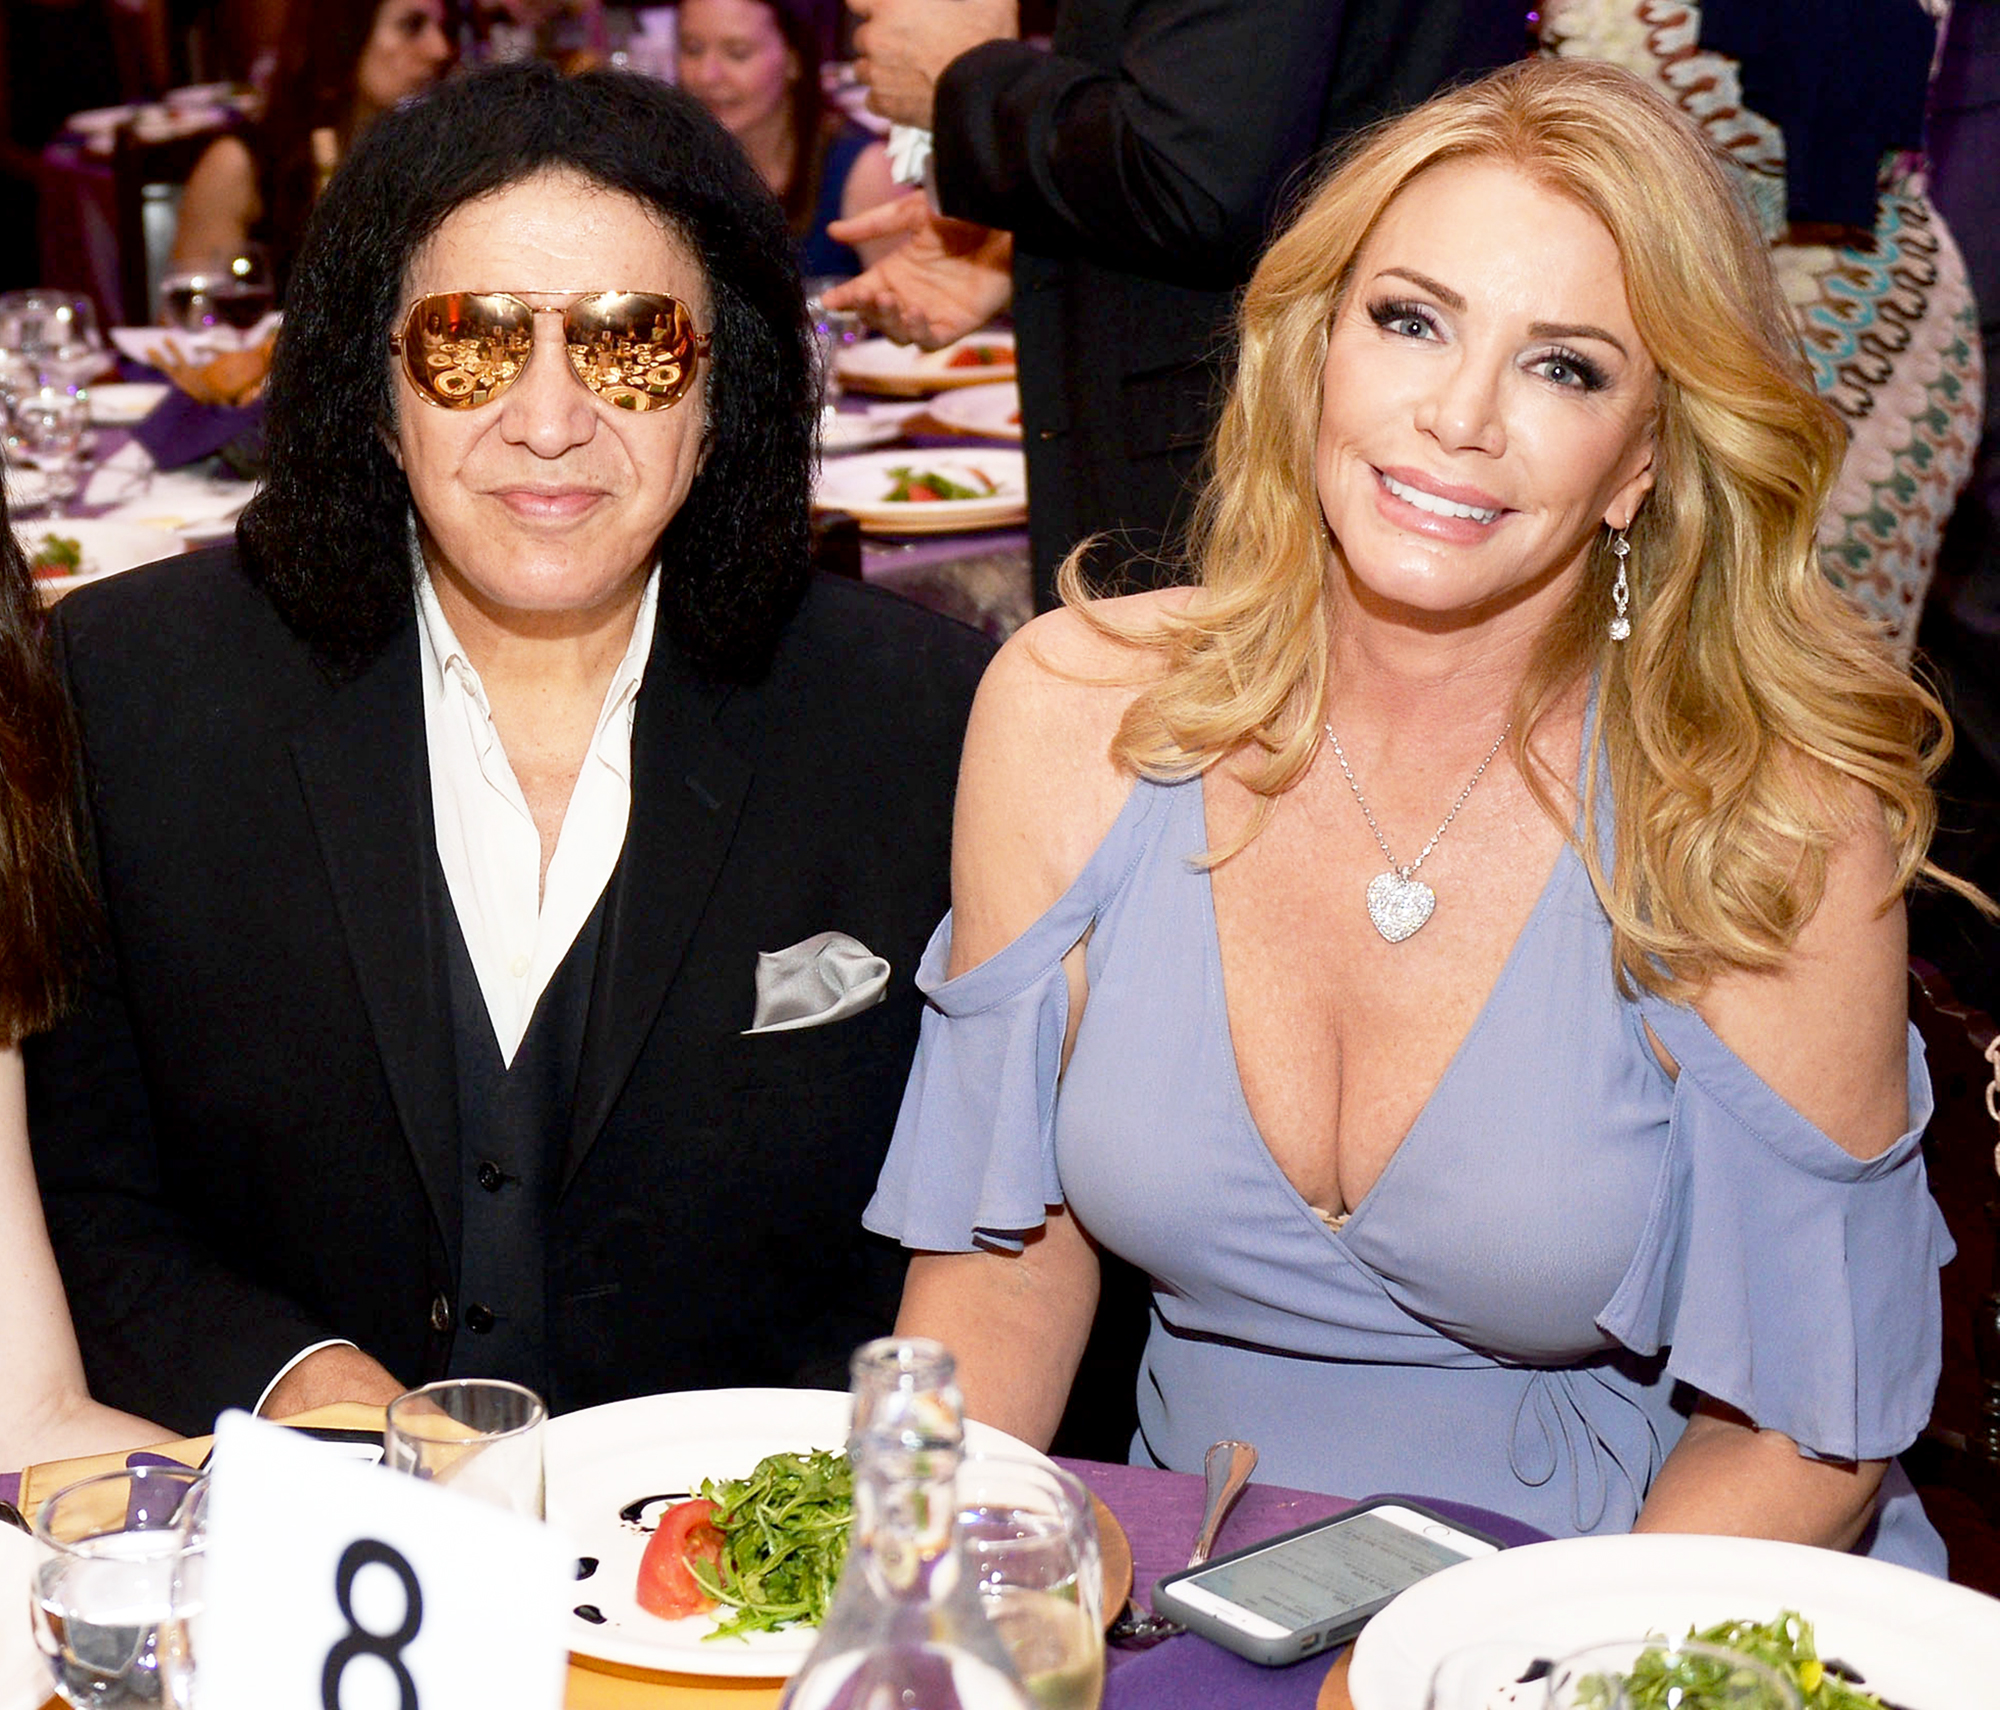 Gene Simmons Says He Made Mistakes, Wife Shannon Tweed Forgave His Trespasses hq nude picture